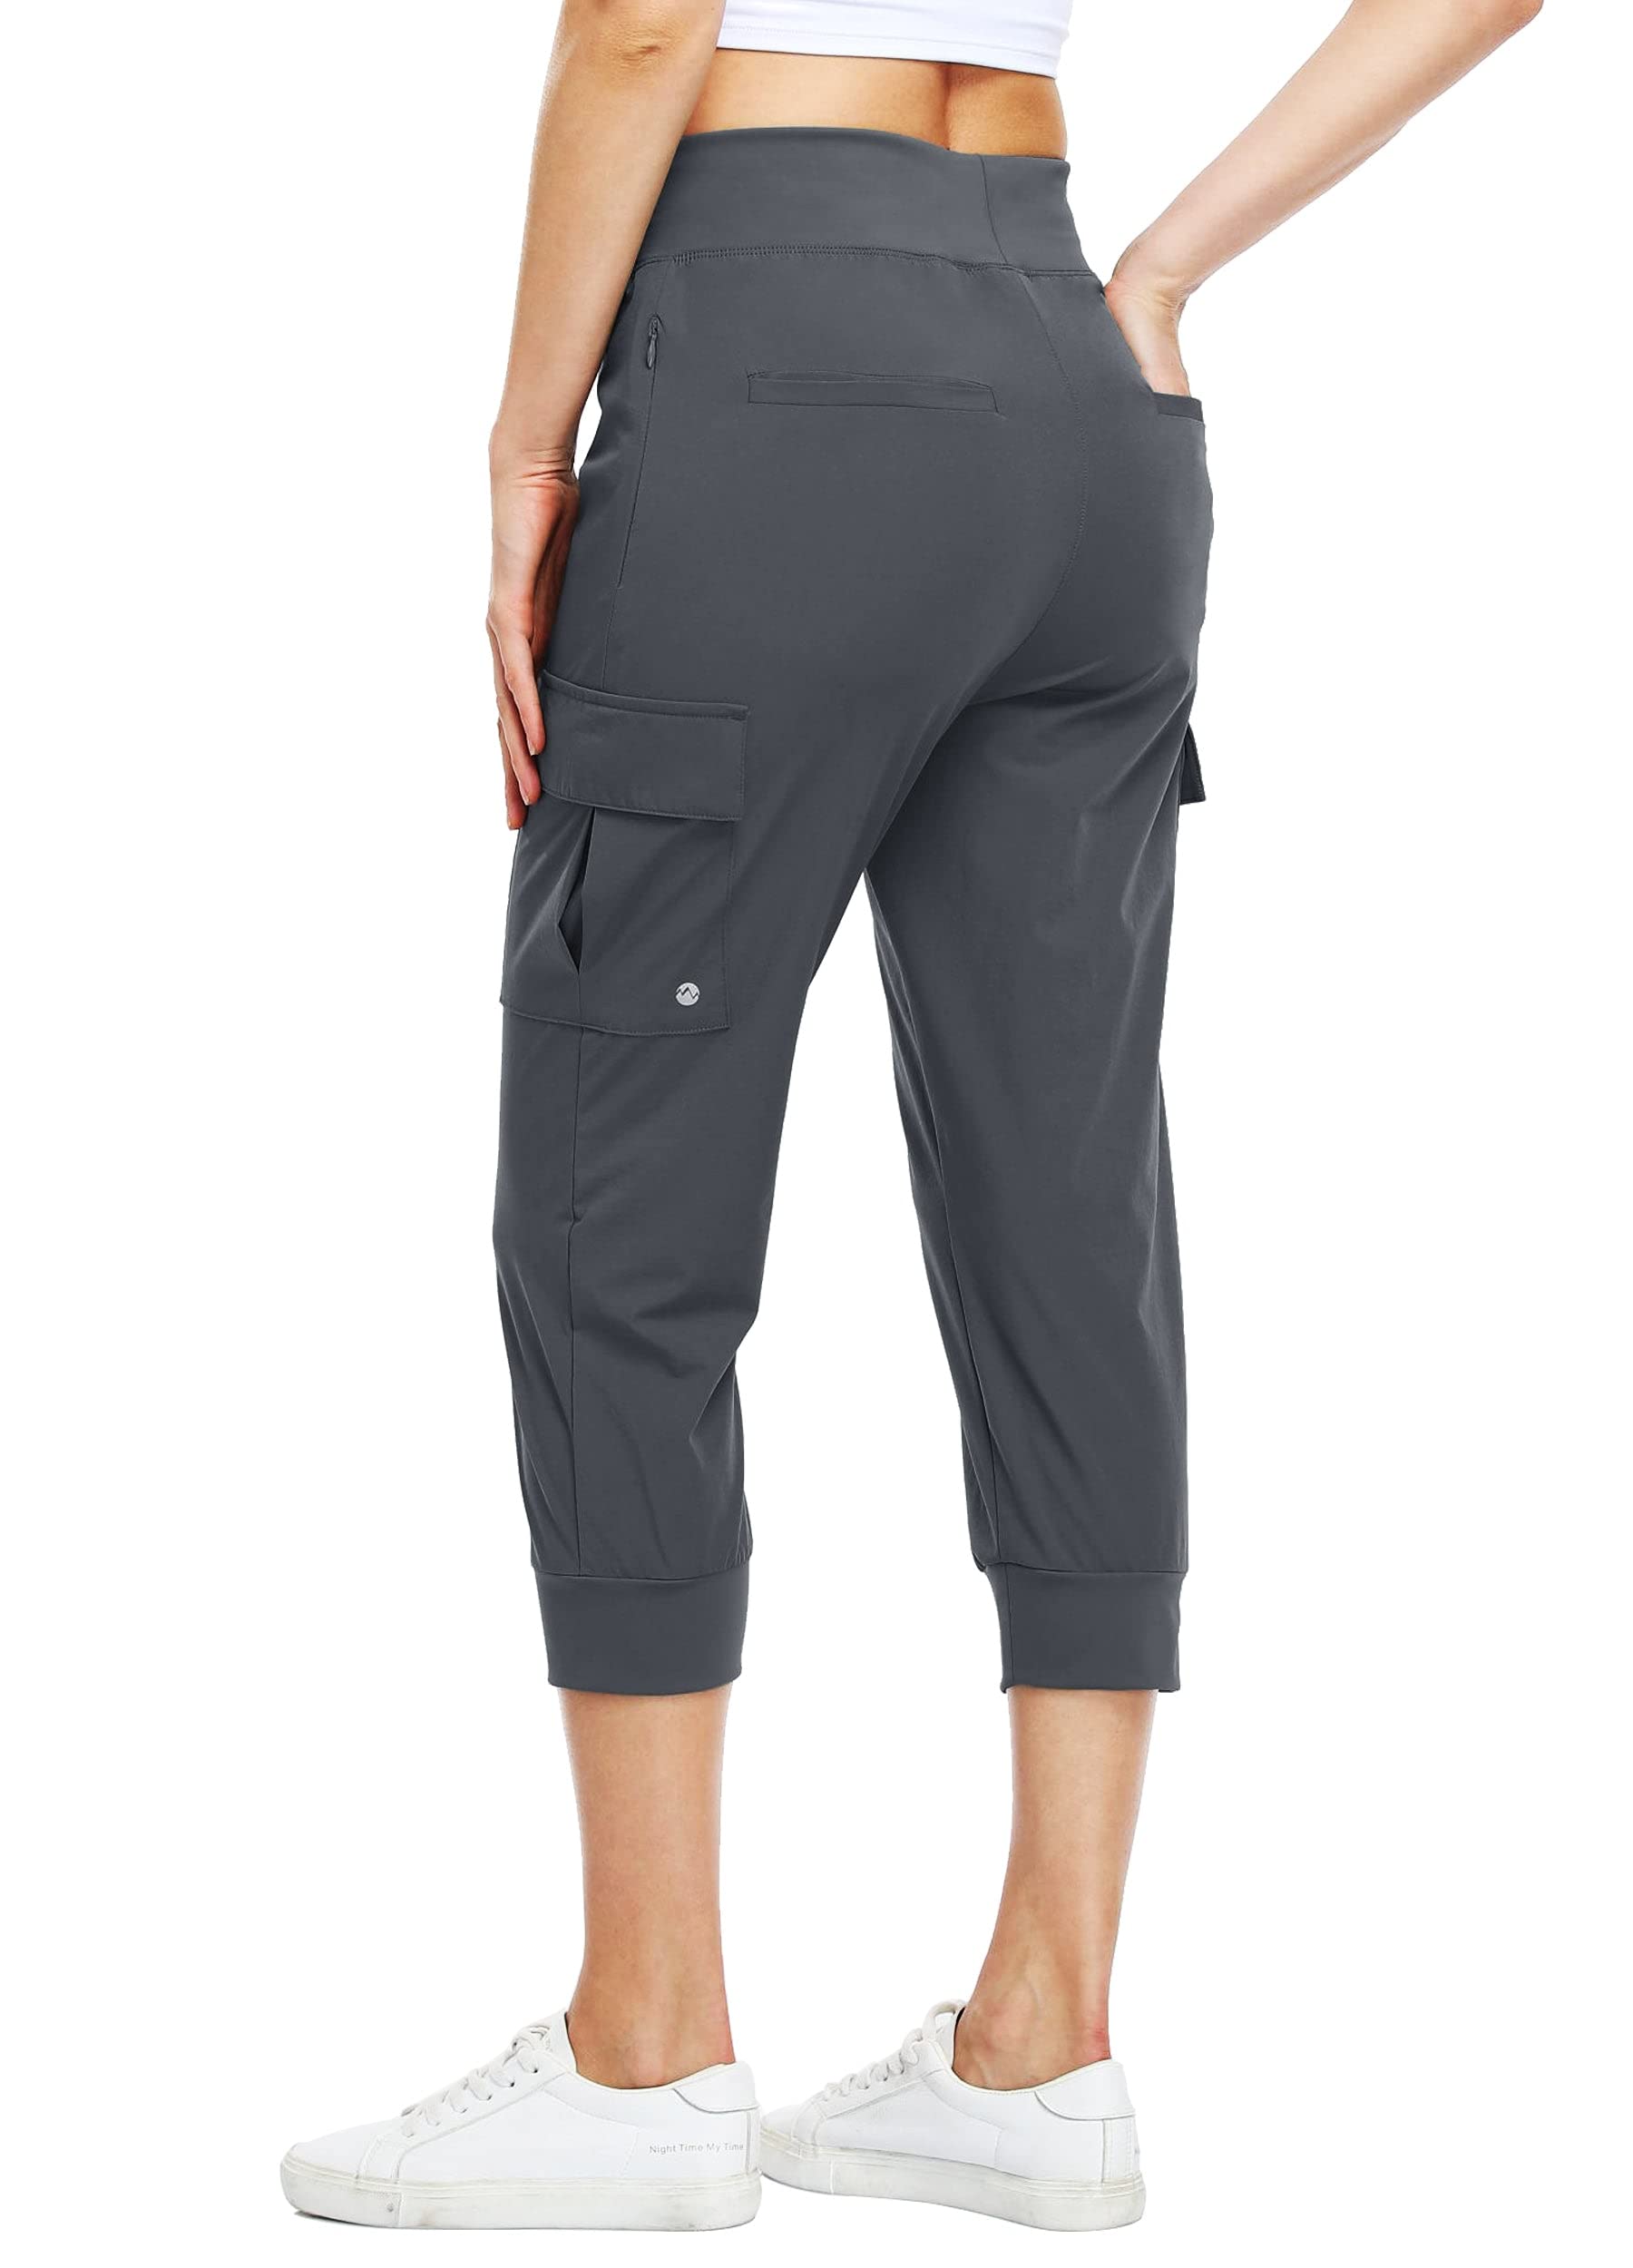 Willit Womens Capris Pants Quick Dry Lightweight Hiking Athletic